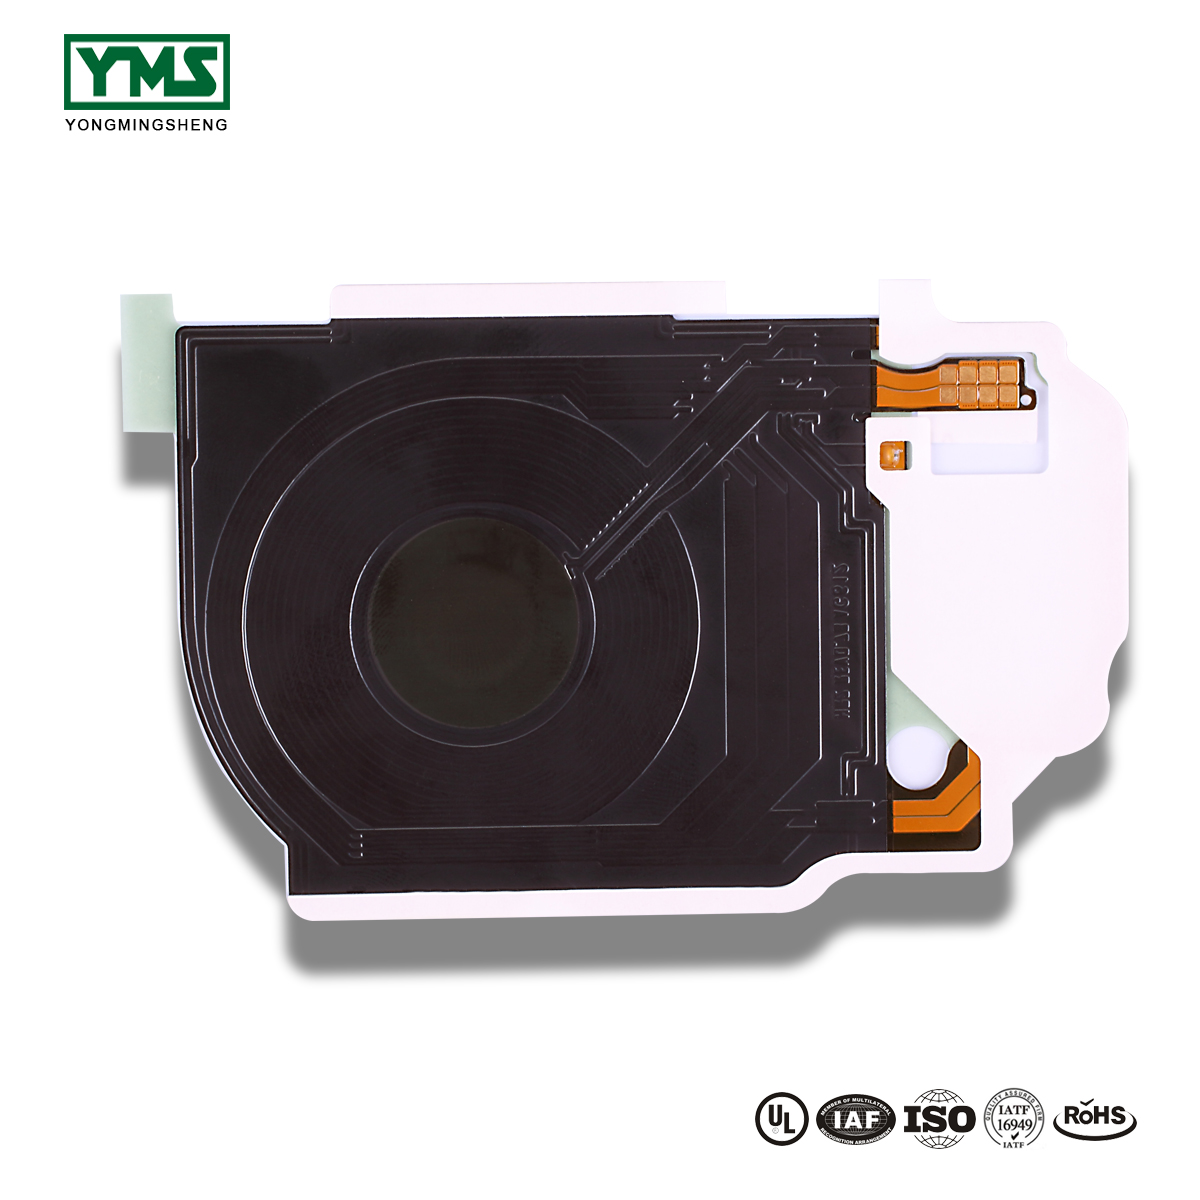 China Supplier Impedance Control Pcb - 1Layer camera module Flexible Board | YMSPCB – Yongmingsheng